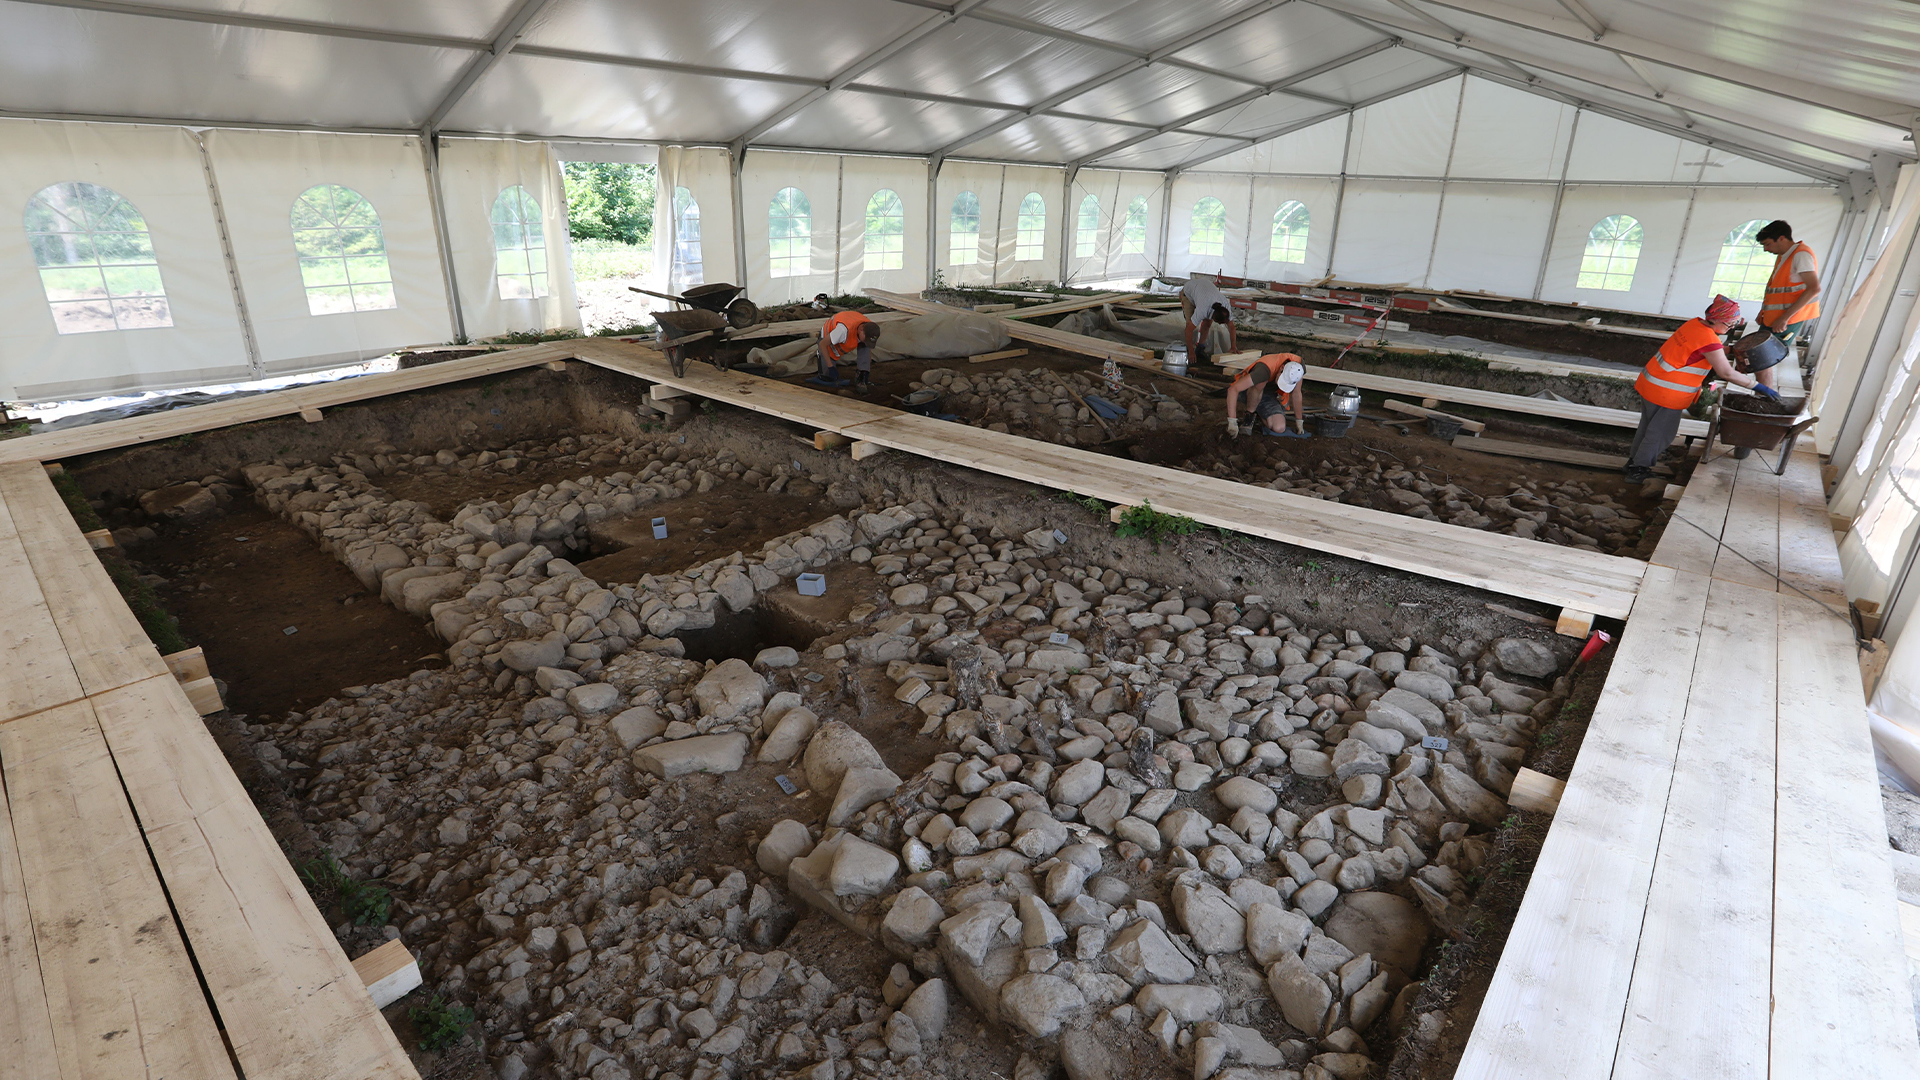 Excavated part of the exposed walls at the Cham-Äbnetwald archaeological site under a tent.